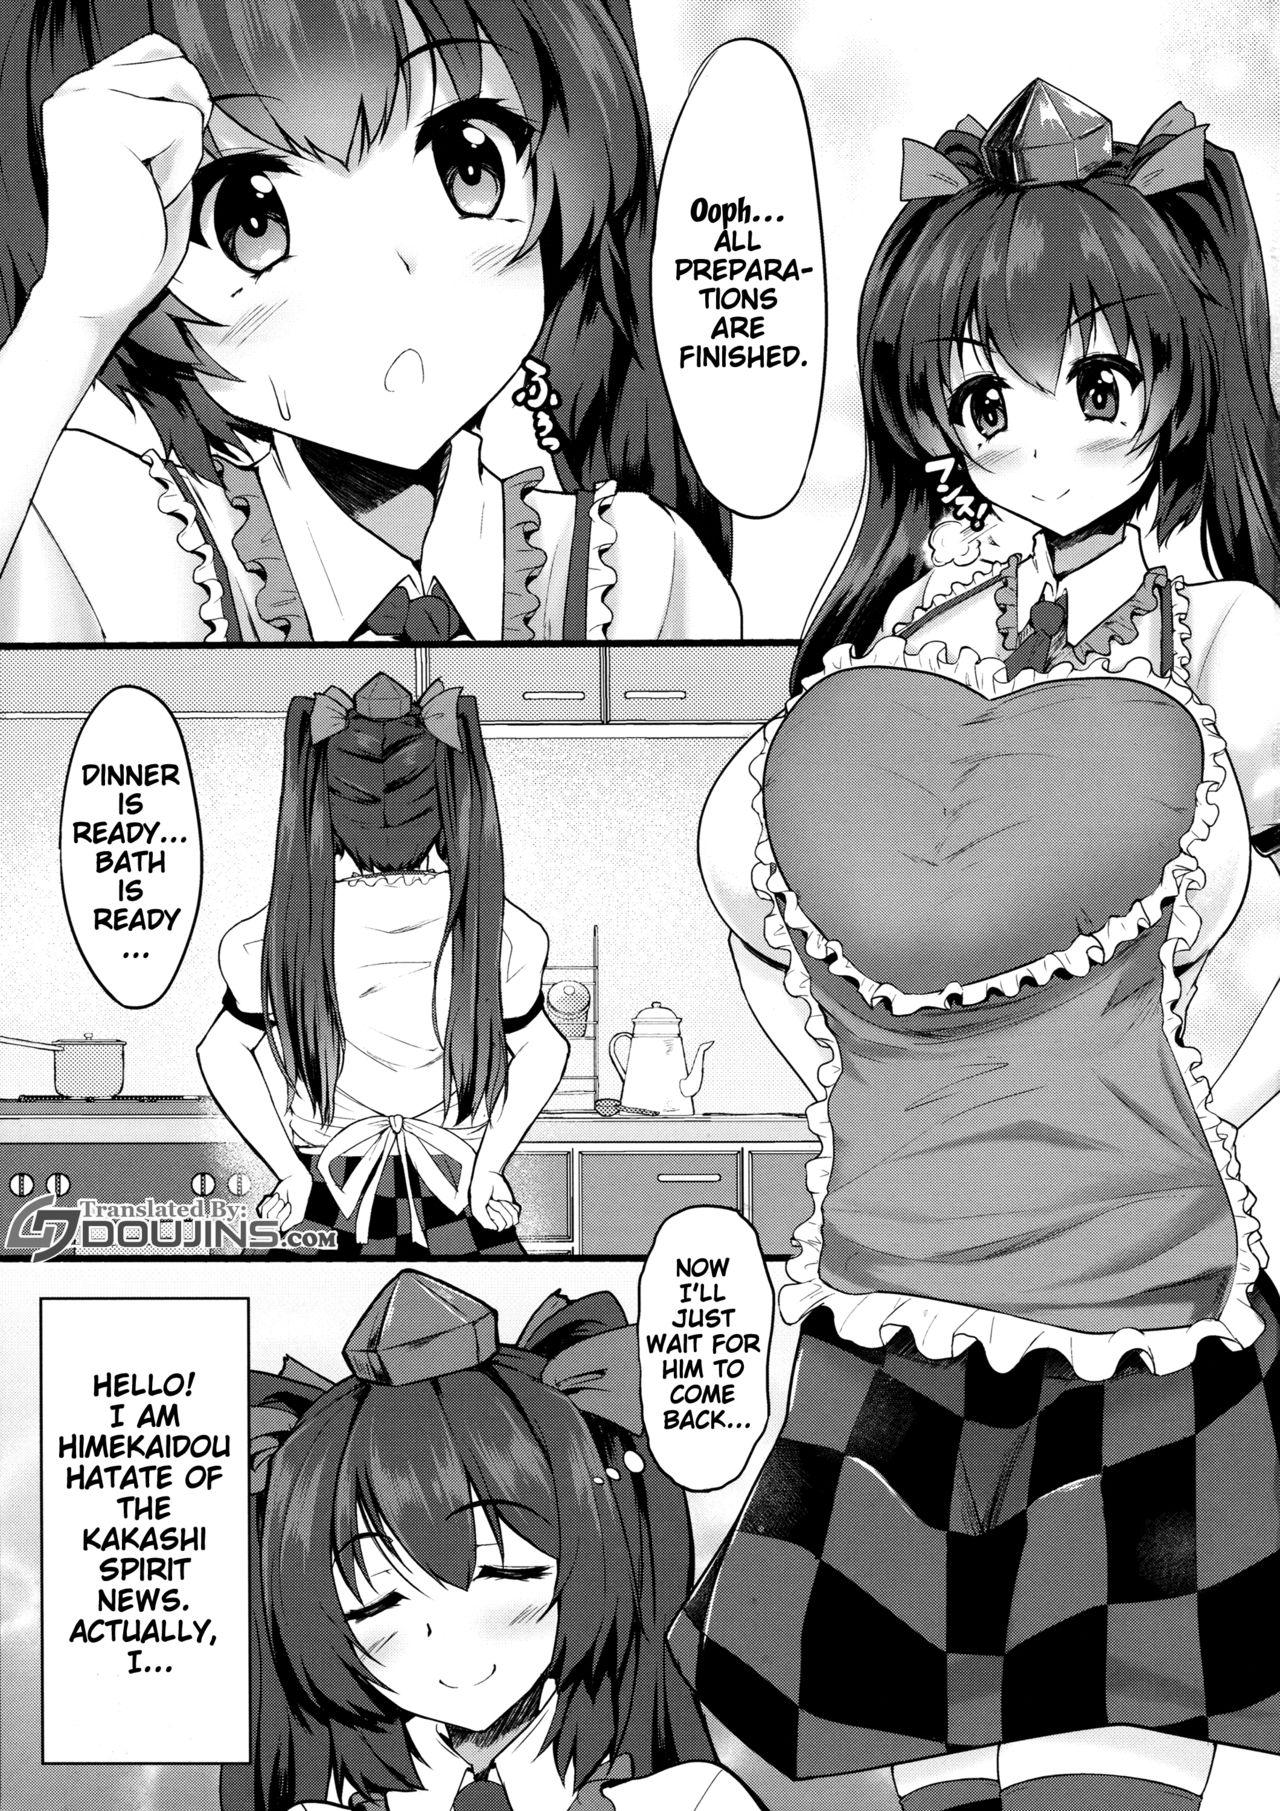 Cogiendo My Sweet Honey Hatate - Touhou project Clothed - Page 2